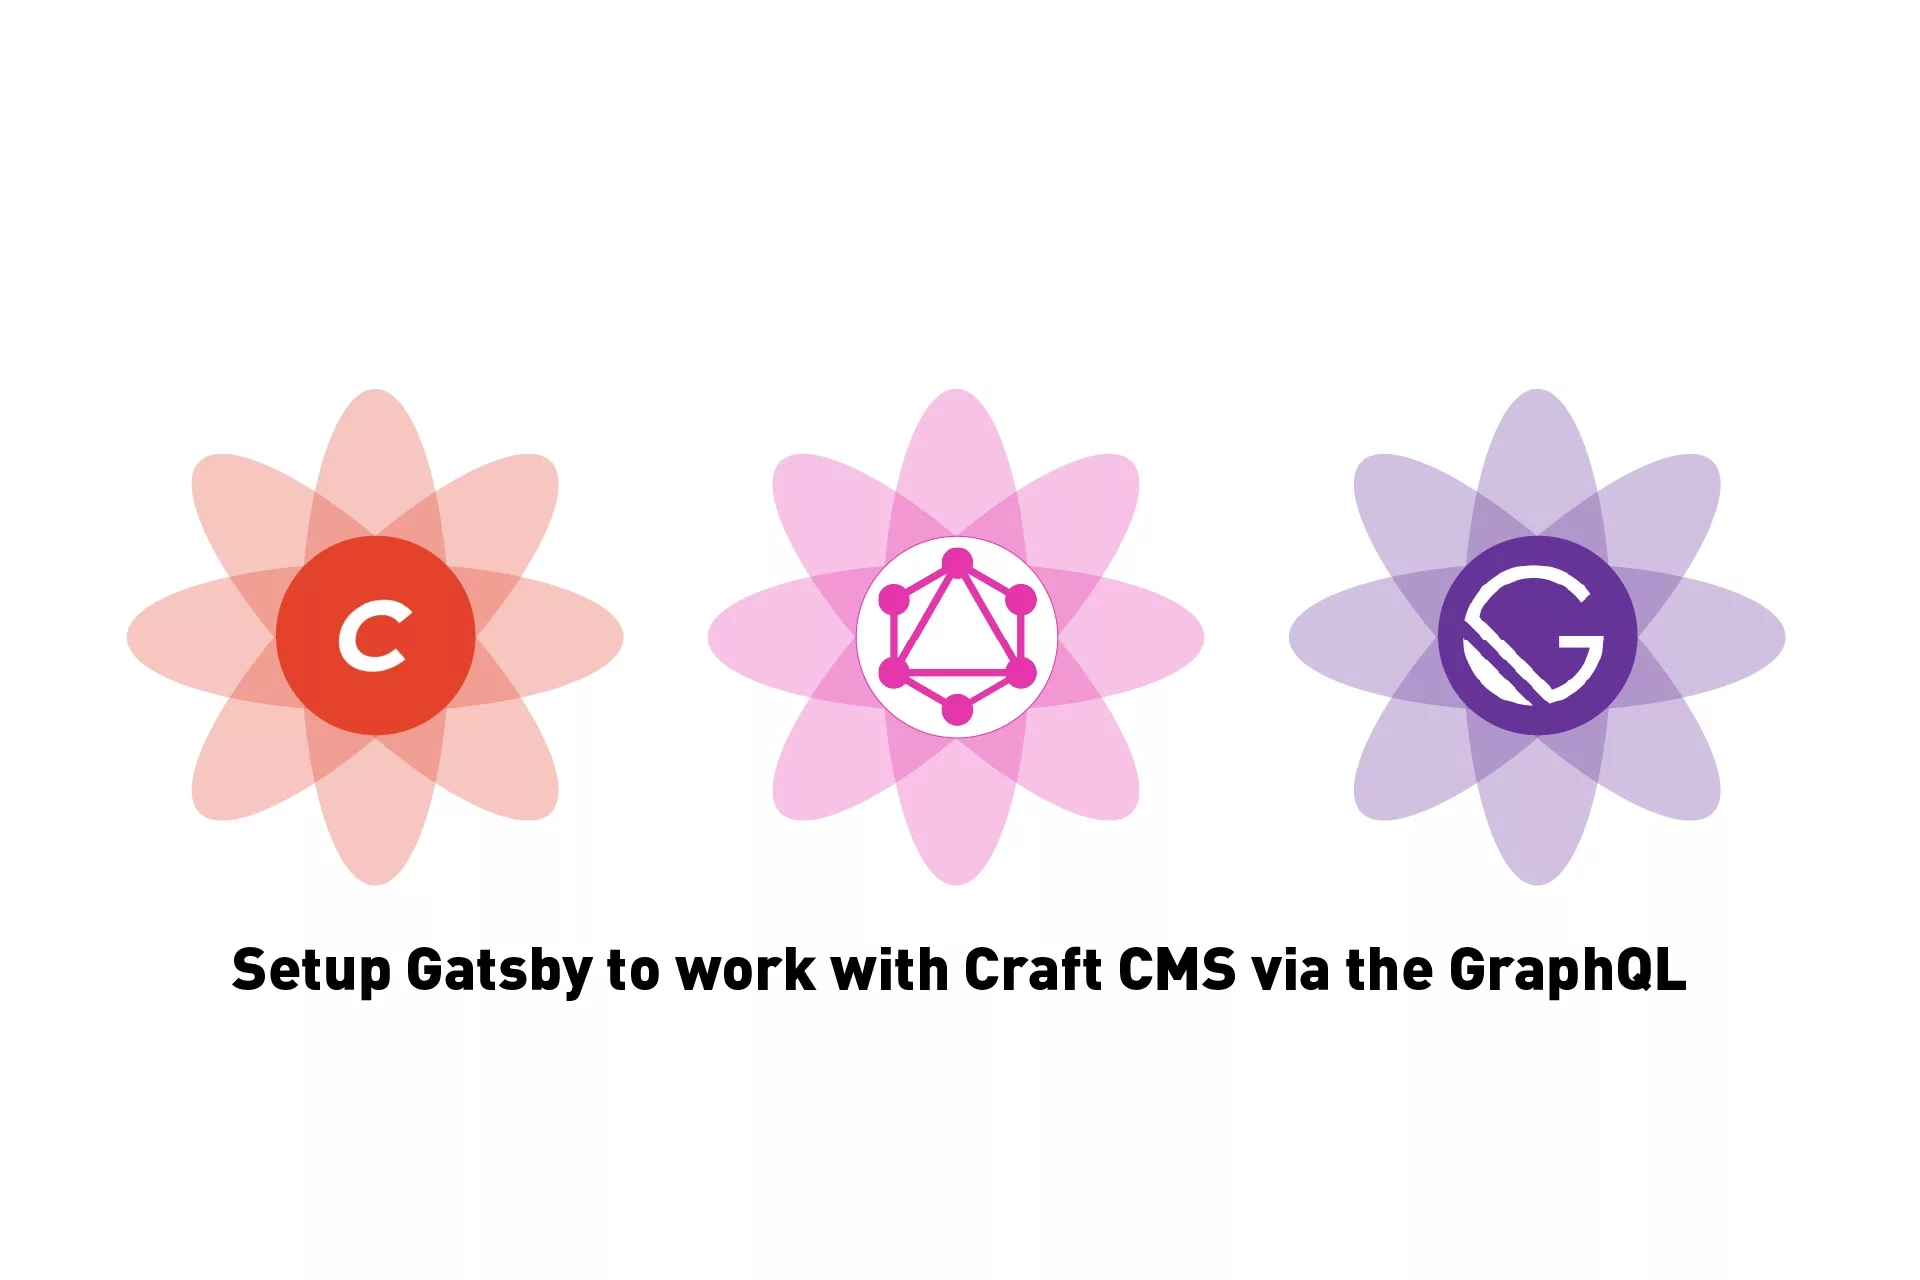 Three flowers that represent Craft CMS, GraphQL & Gatsby with the text 'Setup Gatsby to work with Craft CMS via the Graph' beneath them.